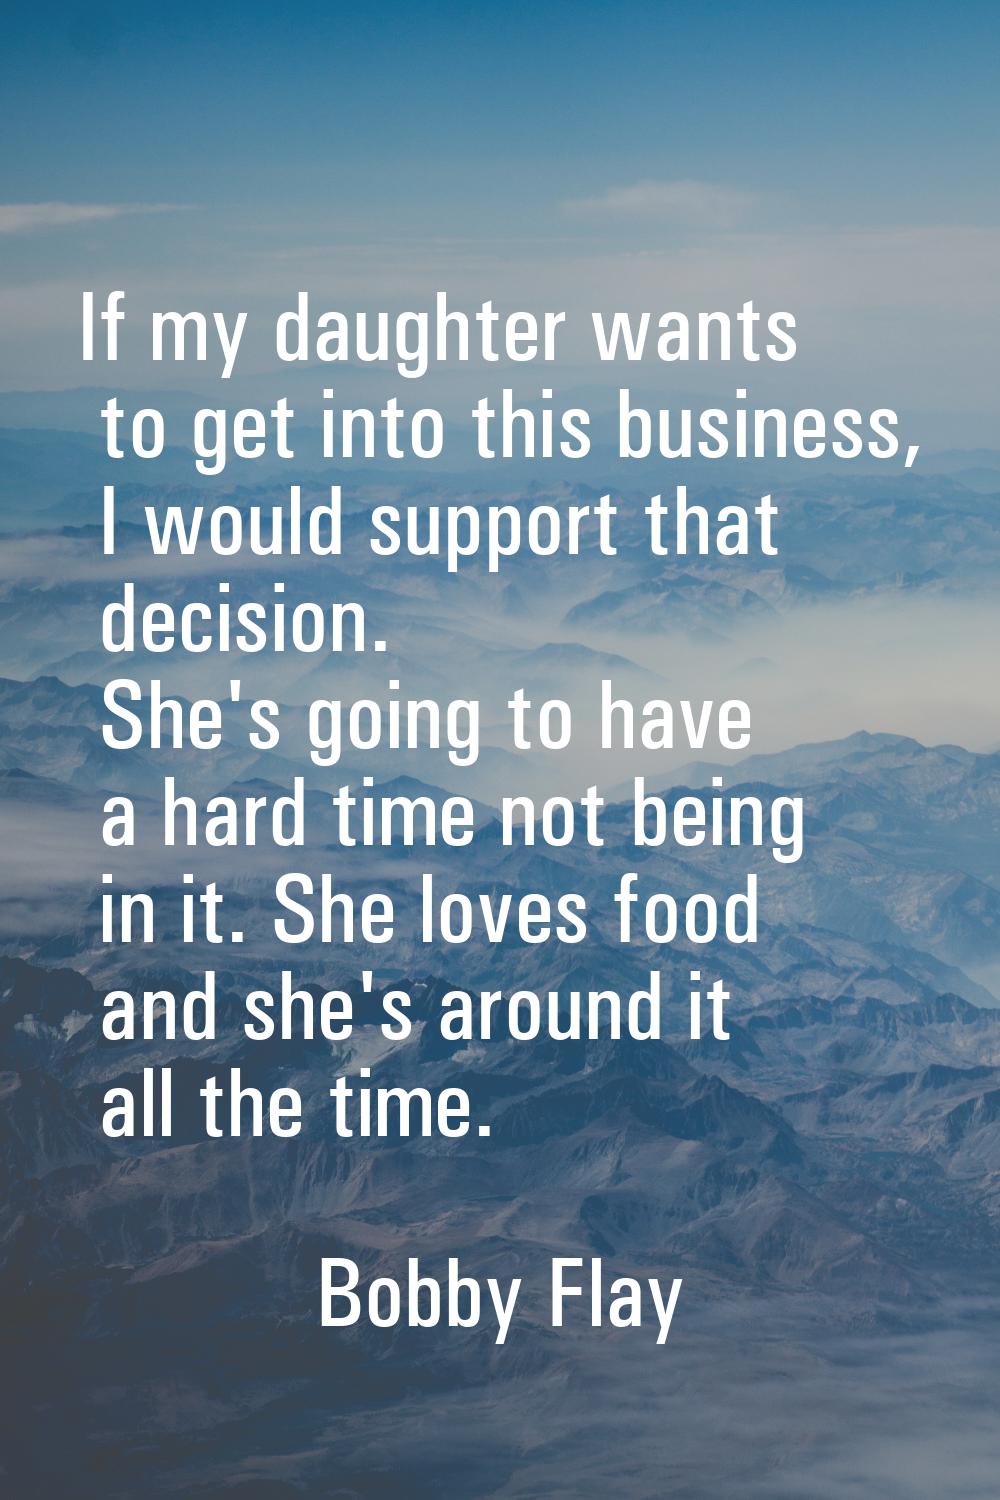 If my daughter wants to get into this business, I would support that decision. She's going to have 